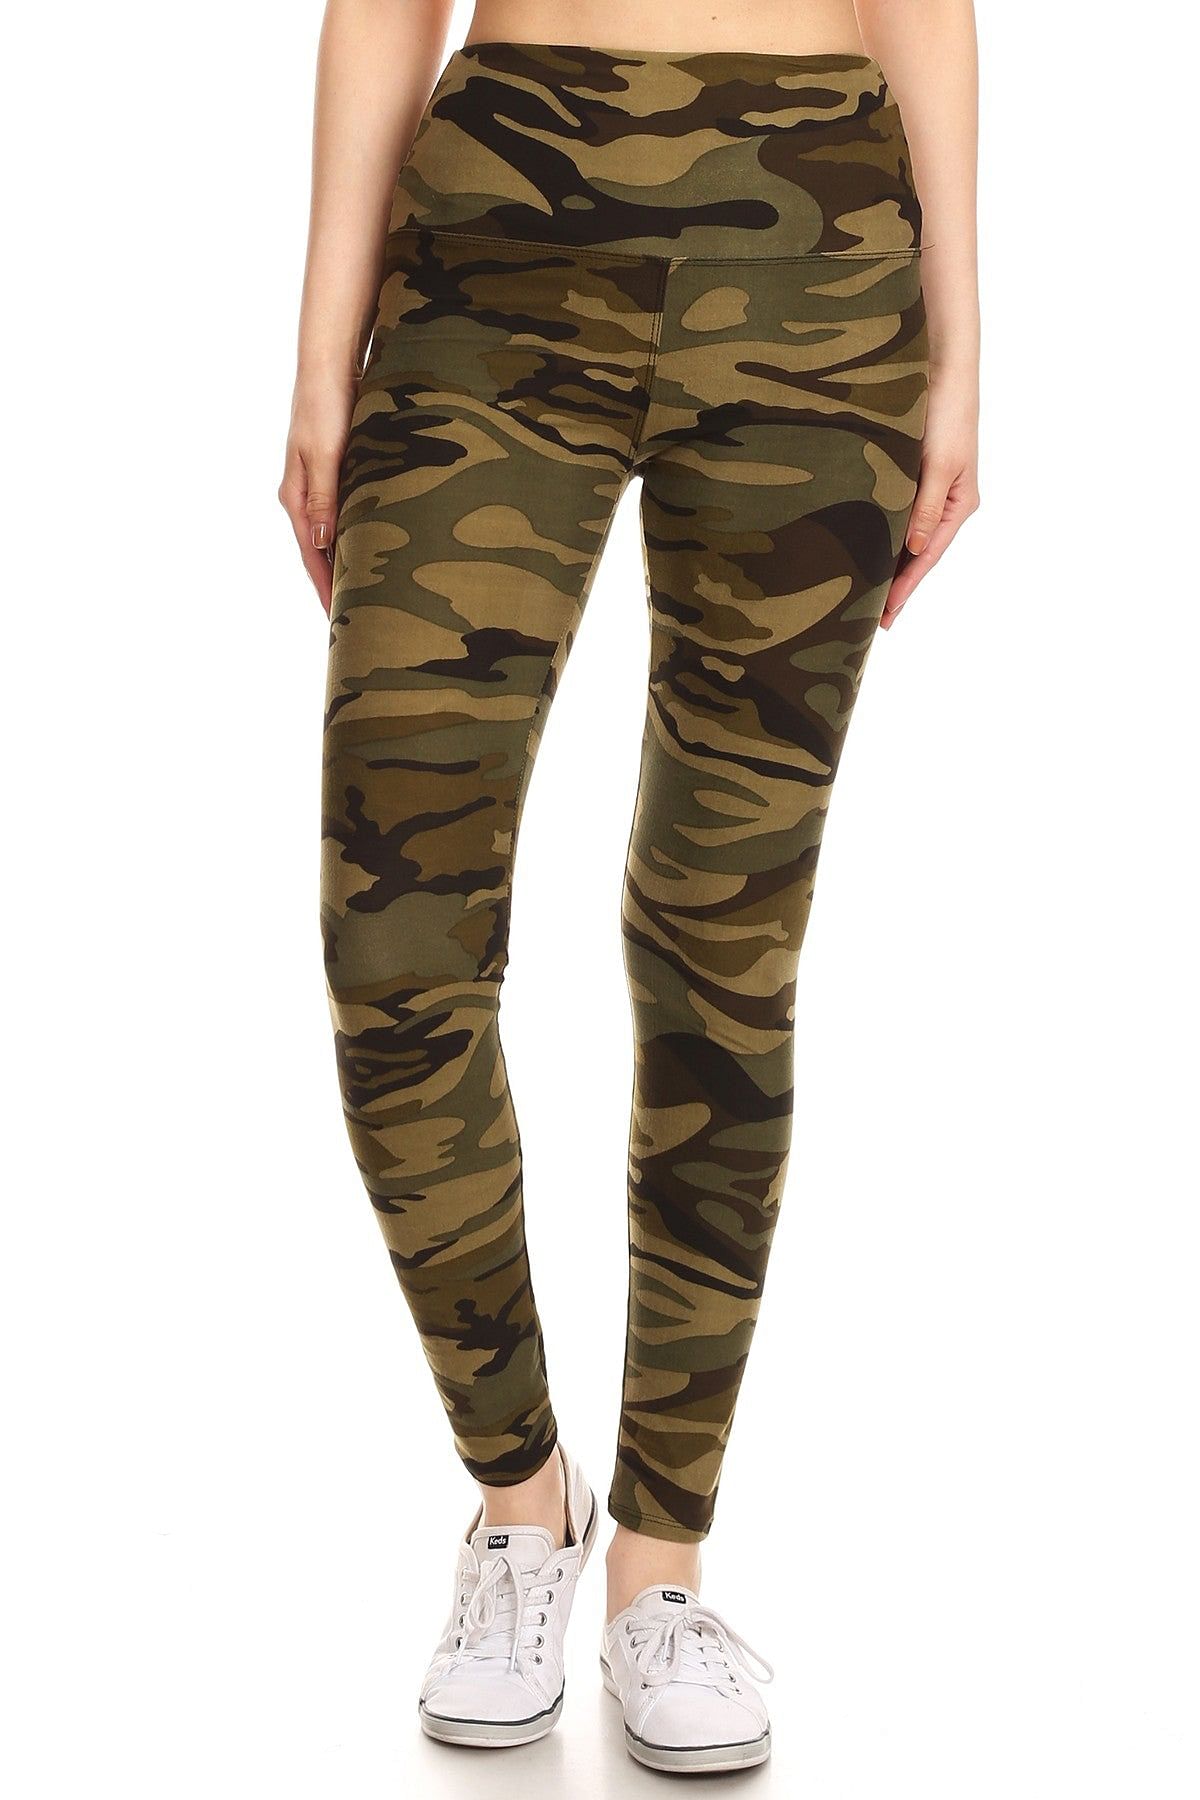 Ladies Camouflage Leggings Slim Fit Stretch Vintage Style Basic Comfort  Daily